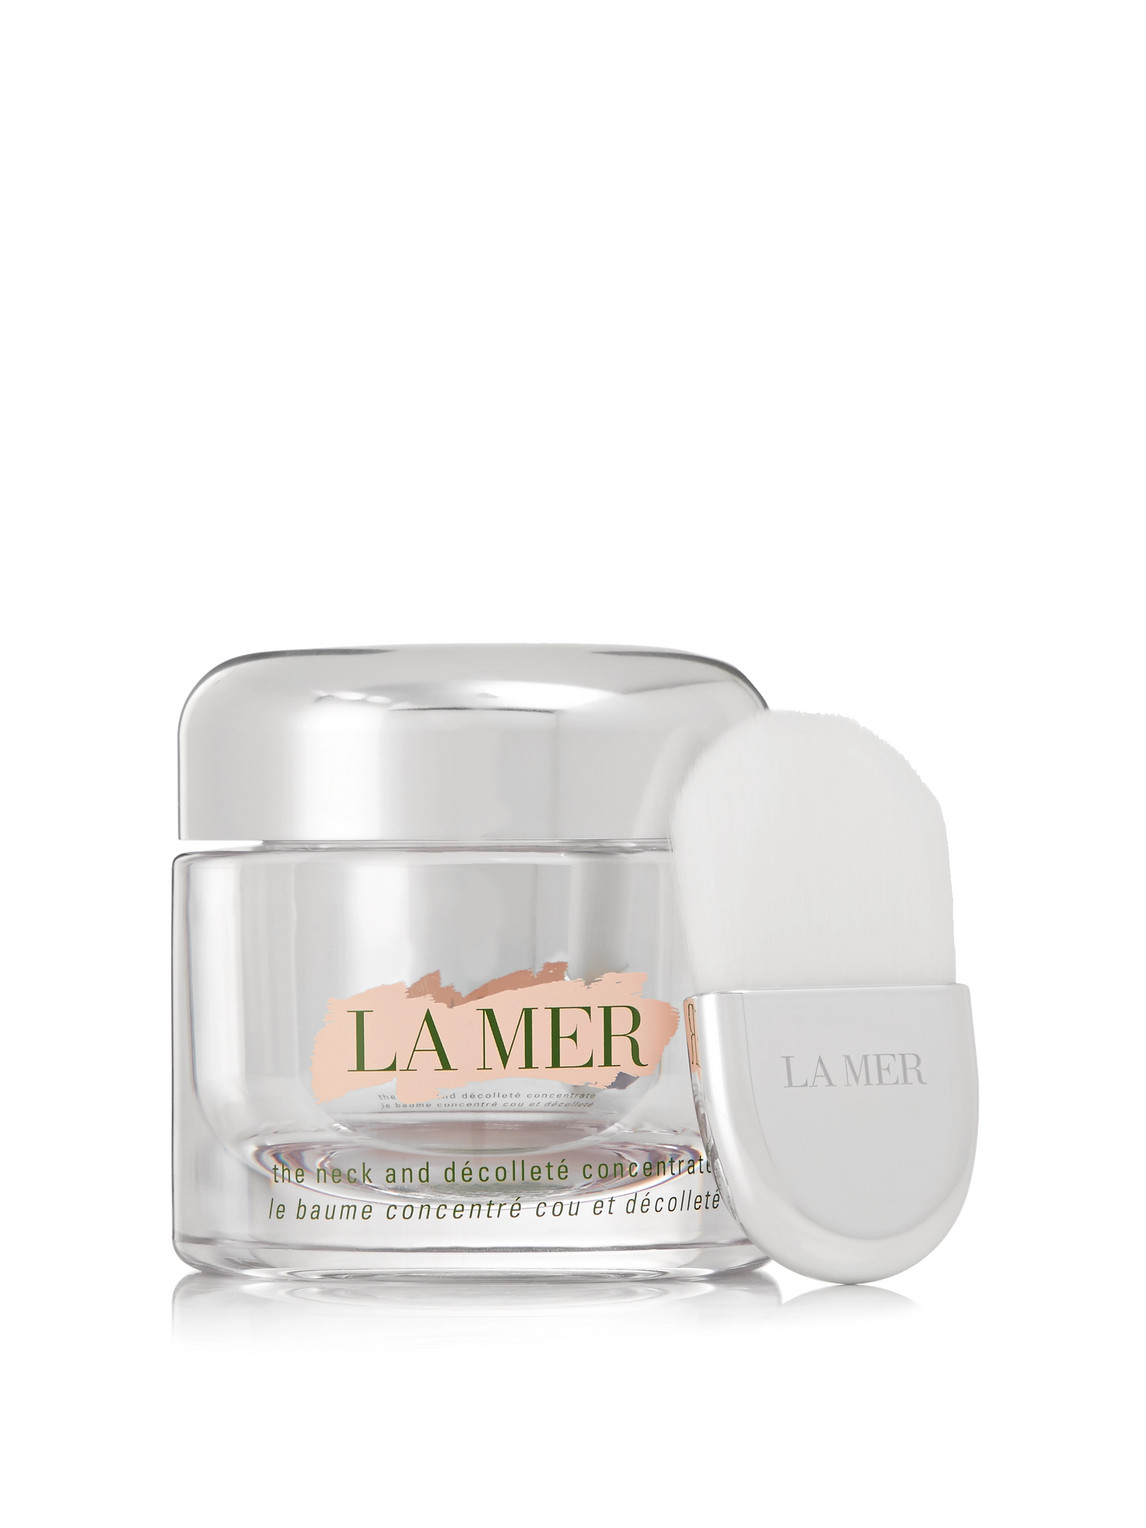 La Mer The Neck And Décolleté Concentrate, 50ml In Colorless